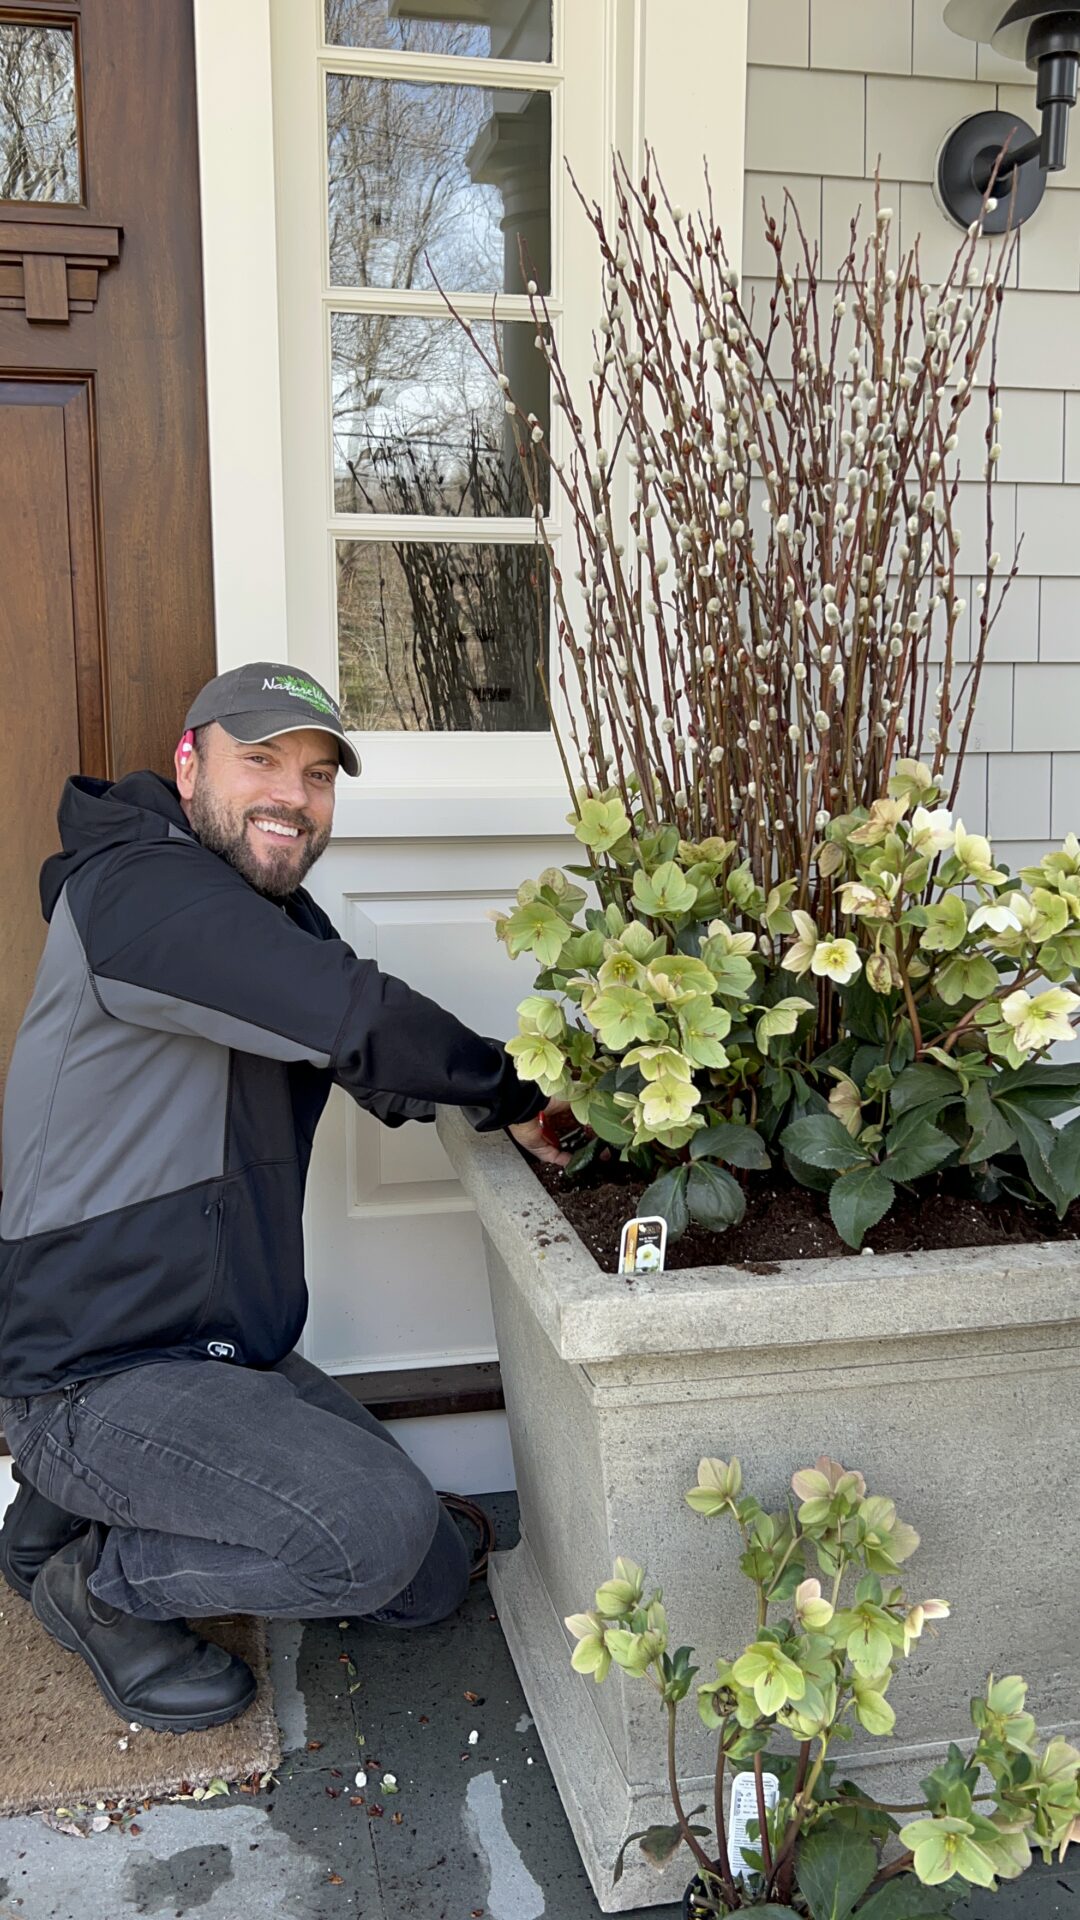 A smiling person is crouching next to a large planter with budding branches and blooming flowers outside a house, seemingly engaged in gardening.